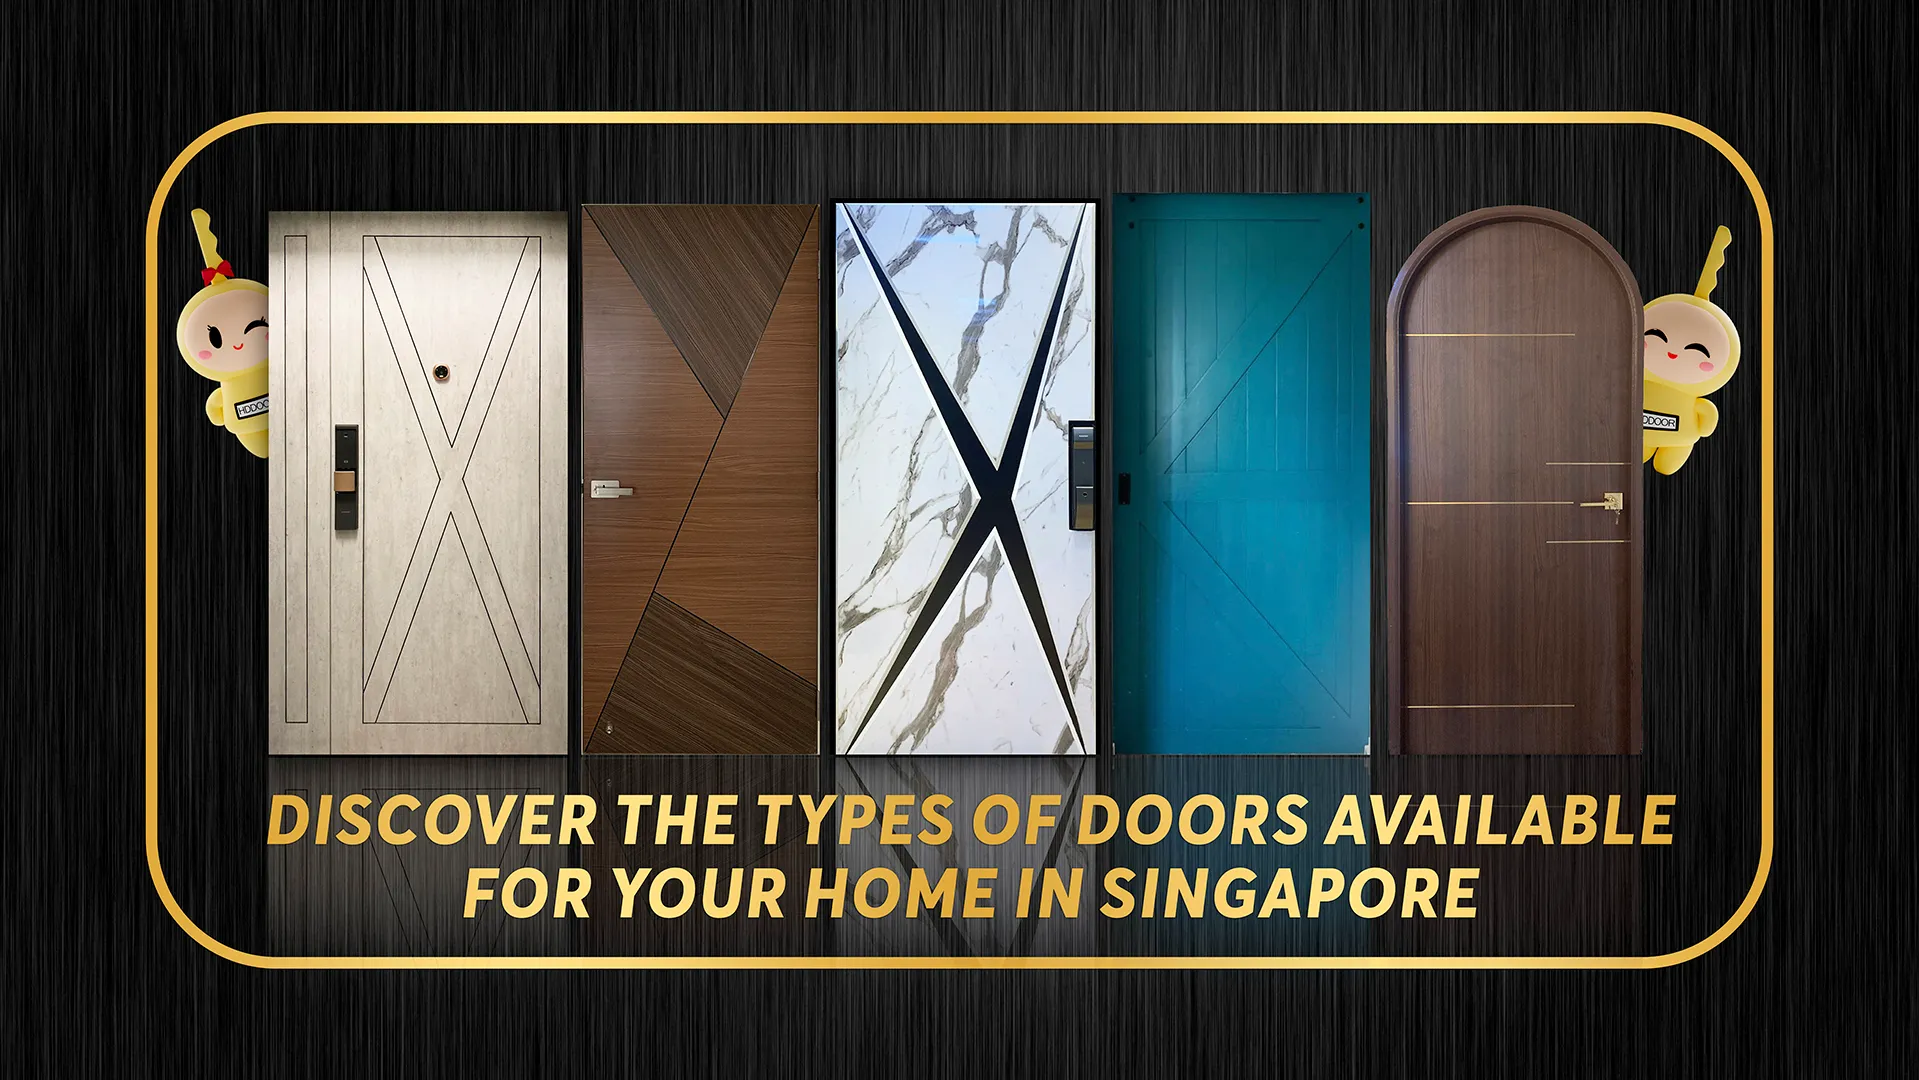 Discover the Types of Doors Available for Your Home in Singapore